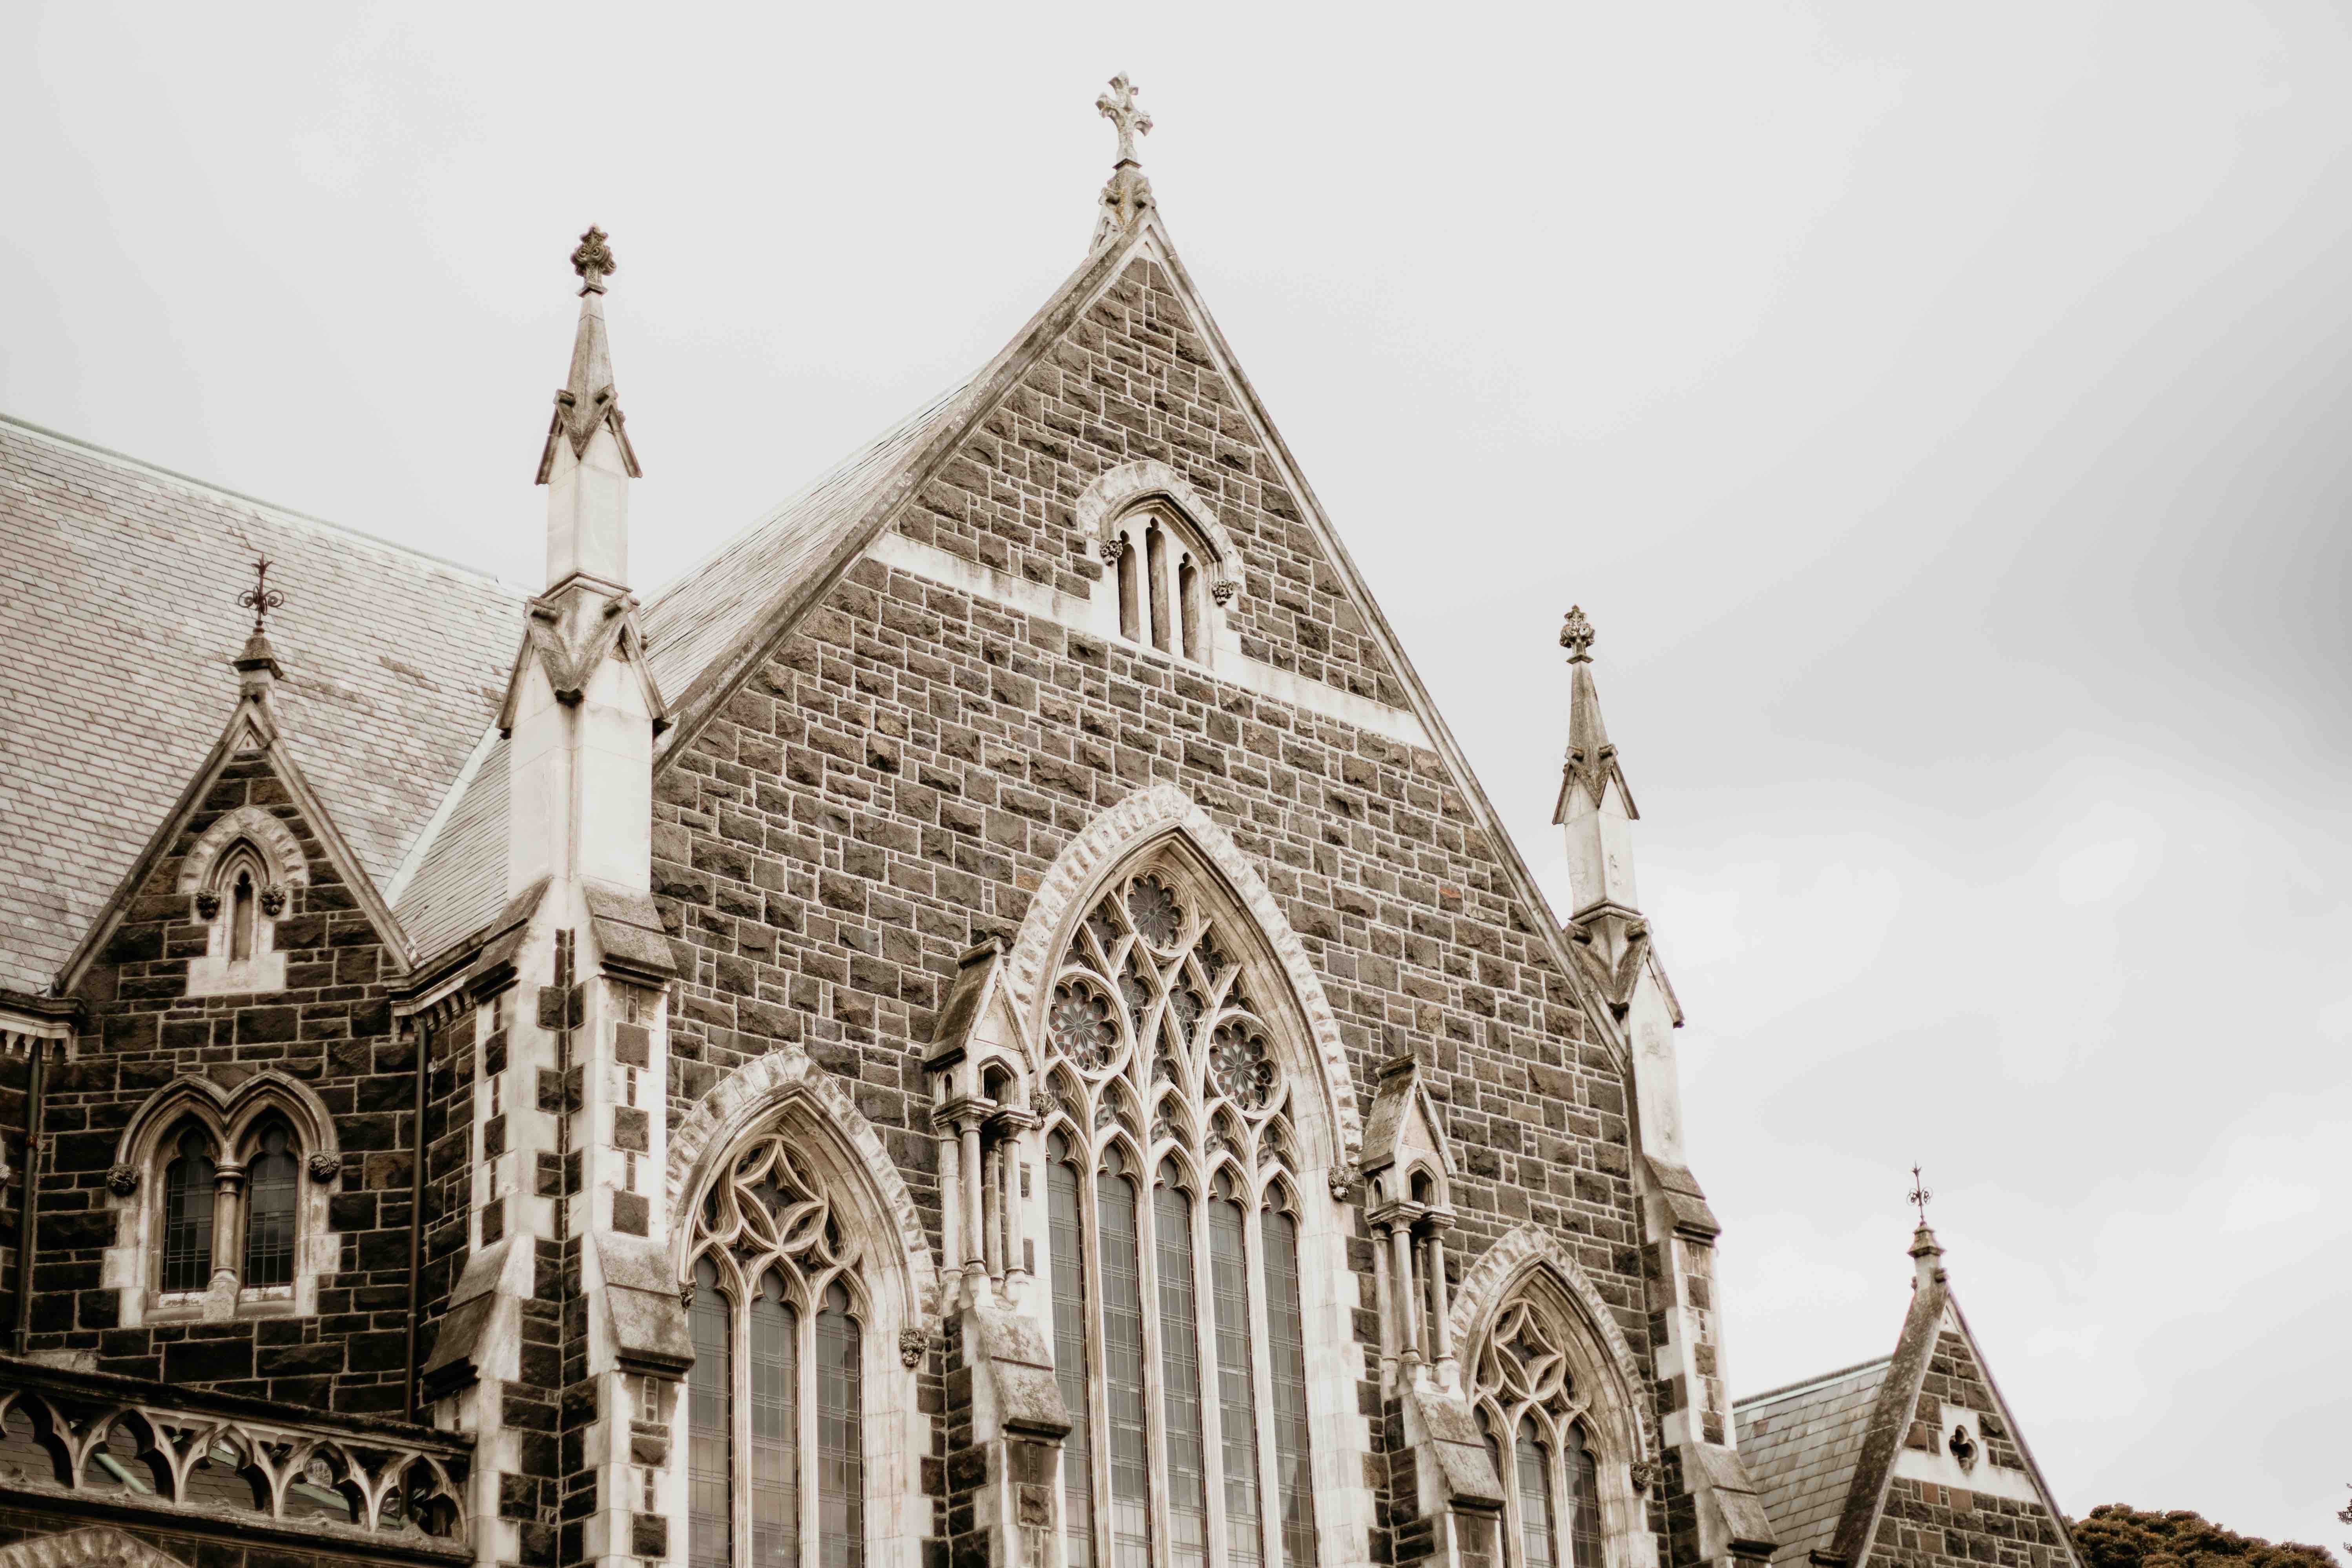 Street view of a cathedral in Dunedin.